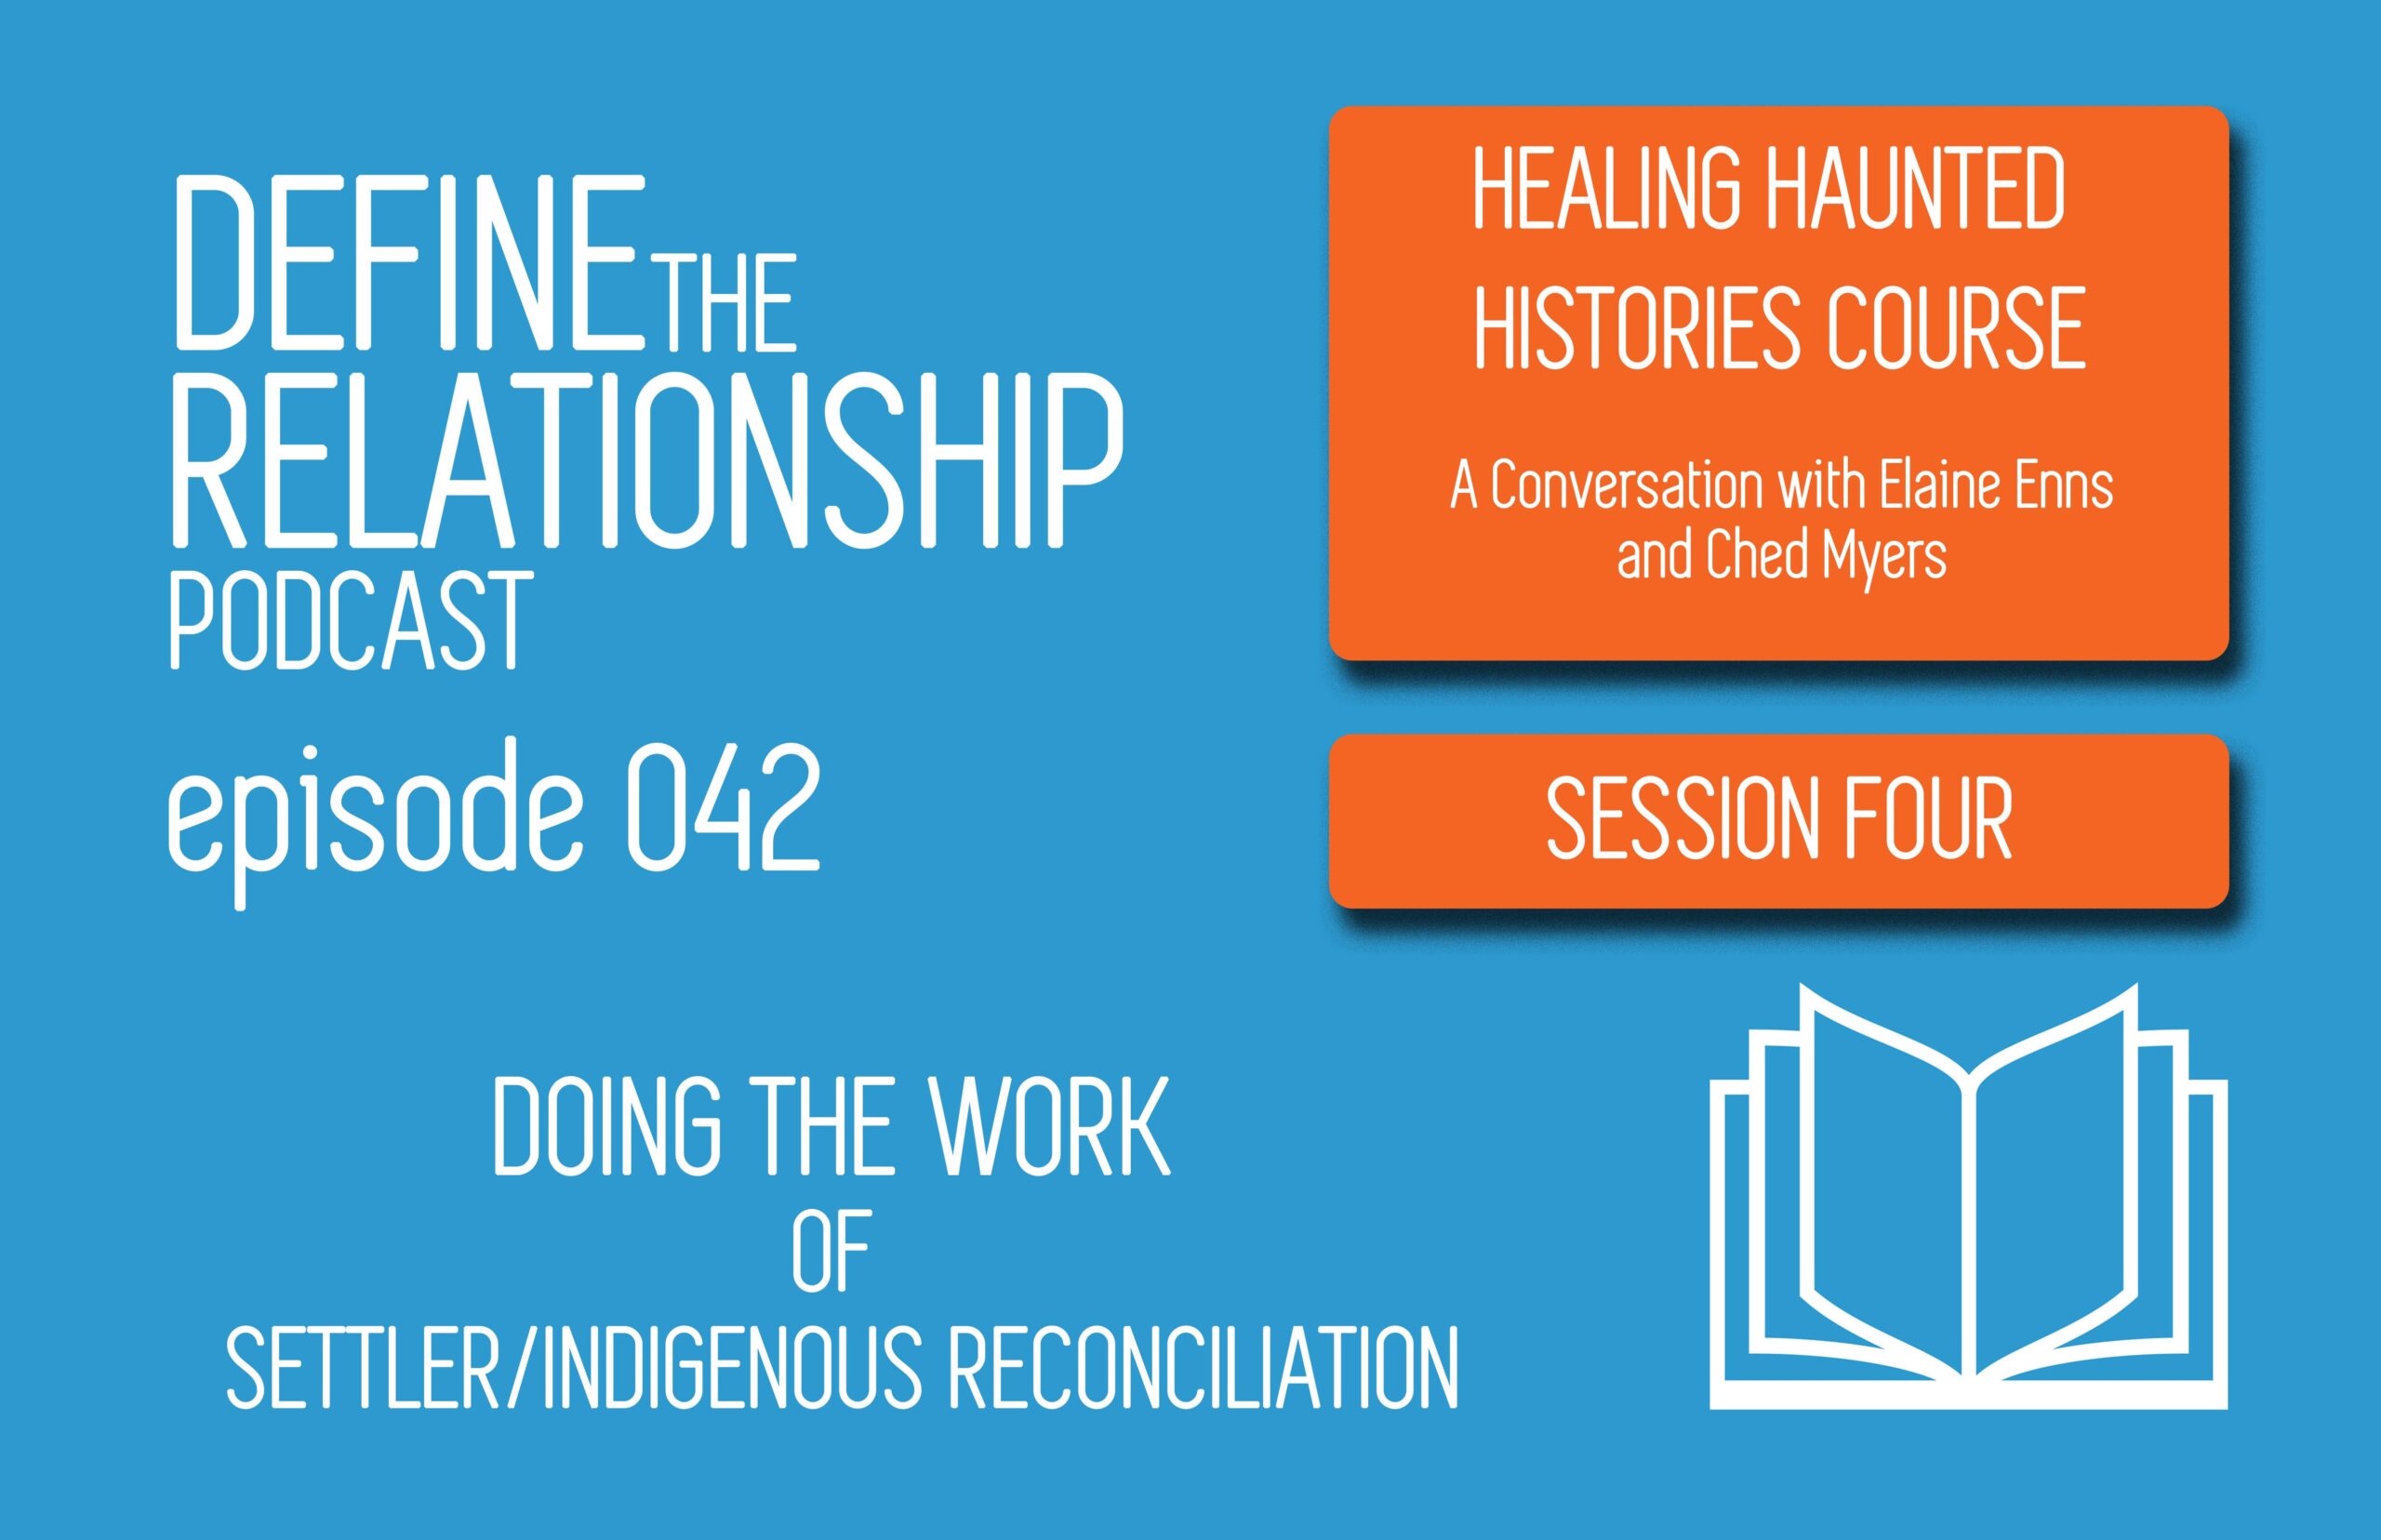 Healing Haunted Histories Course – Session Four – A Conversation with the Authors – Episode 042